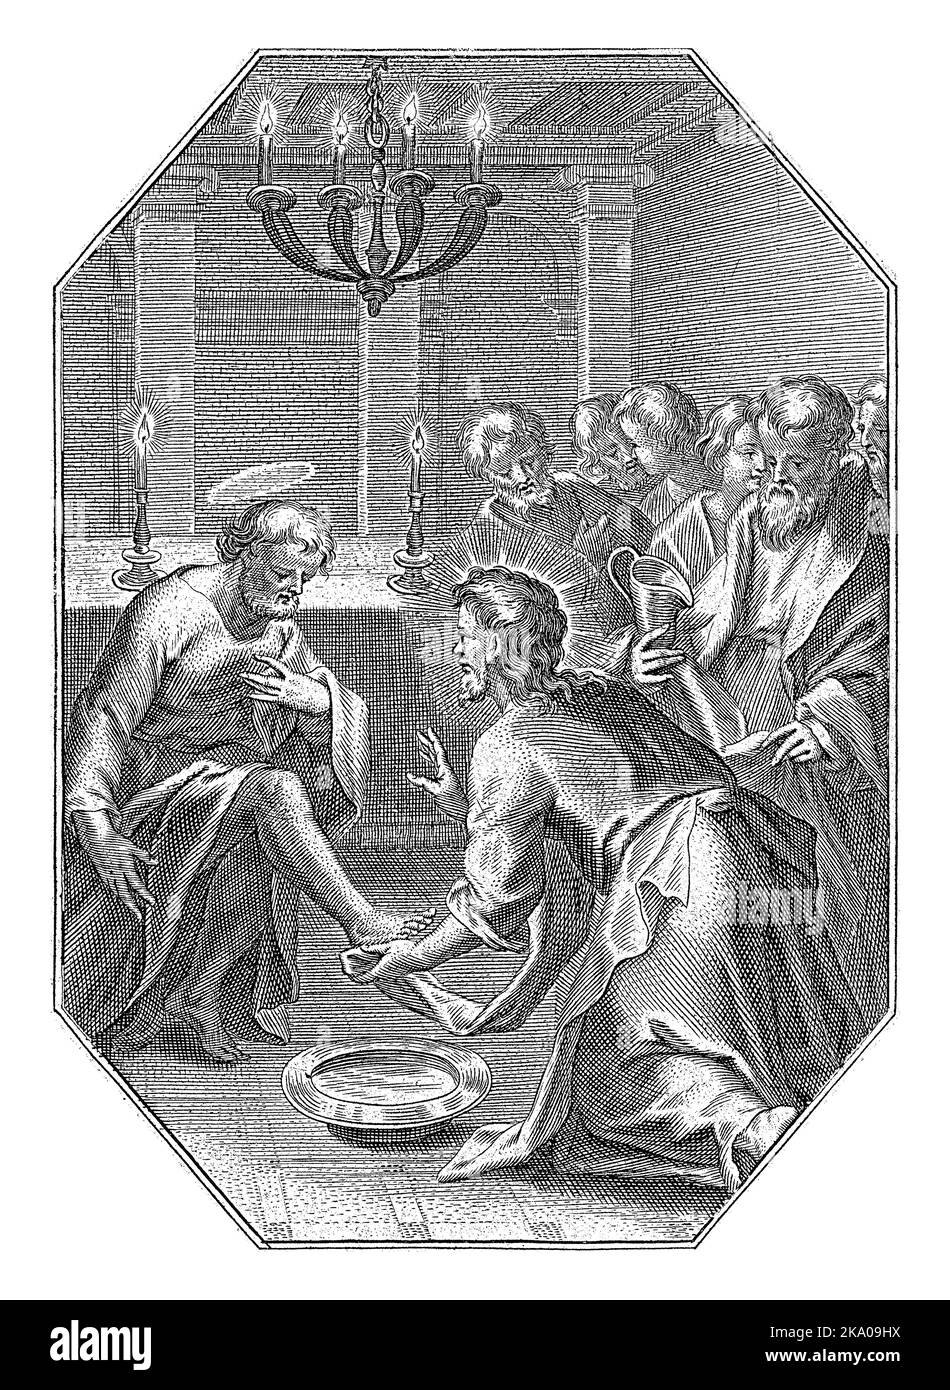 Washing the feet, Cornelis Galle (I), 1586 - 1650 Christ washes the feet of the apostles one by one. He kneels on the ground and dries the feet of the Stock Photo